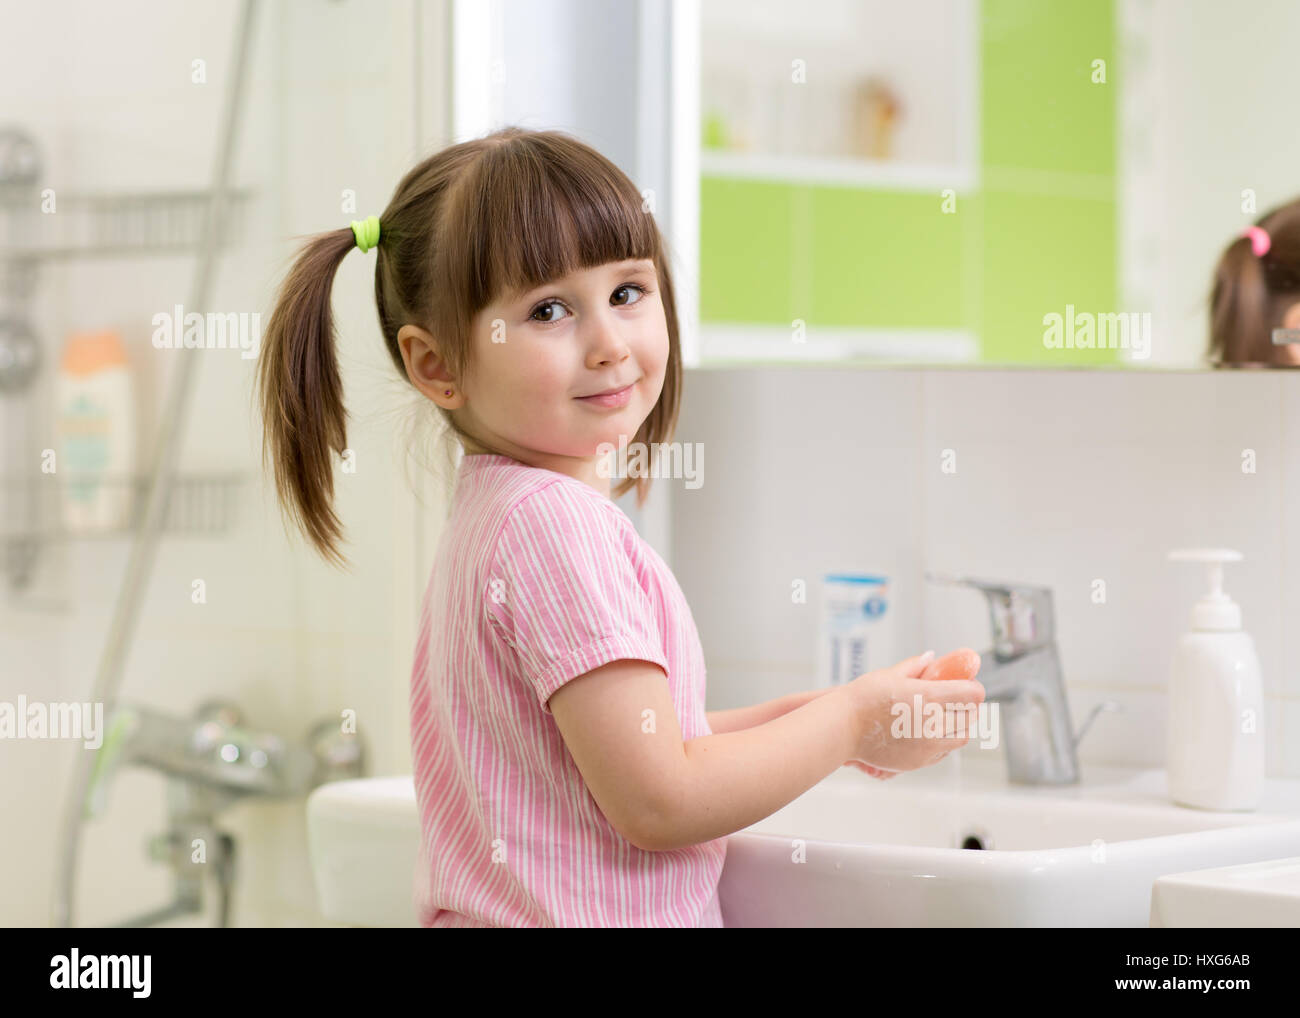 Cute kid girl with ponytail in pink bathrobe washing her hands. Stock Photo